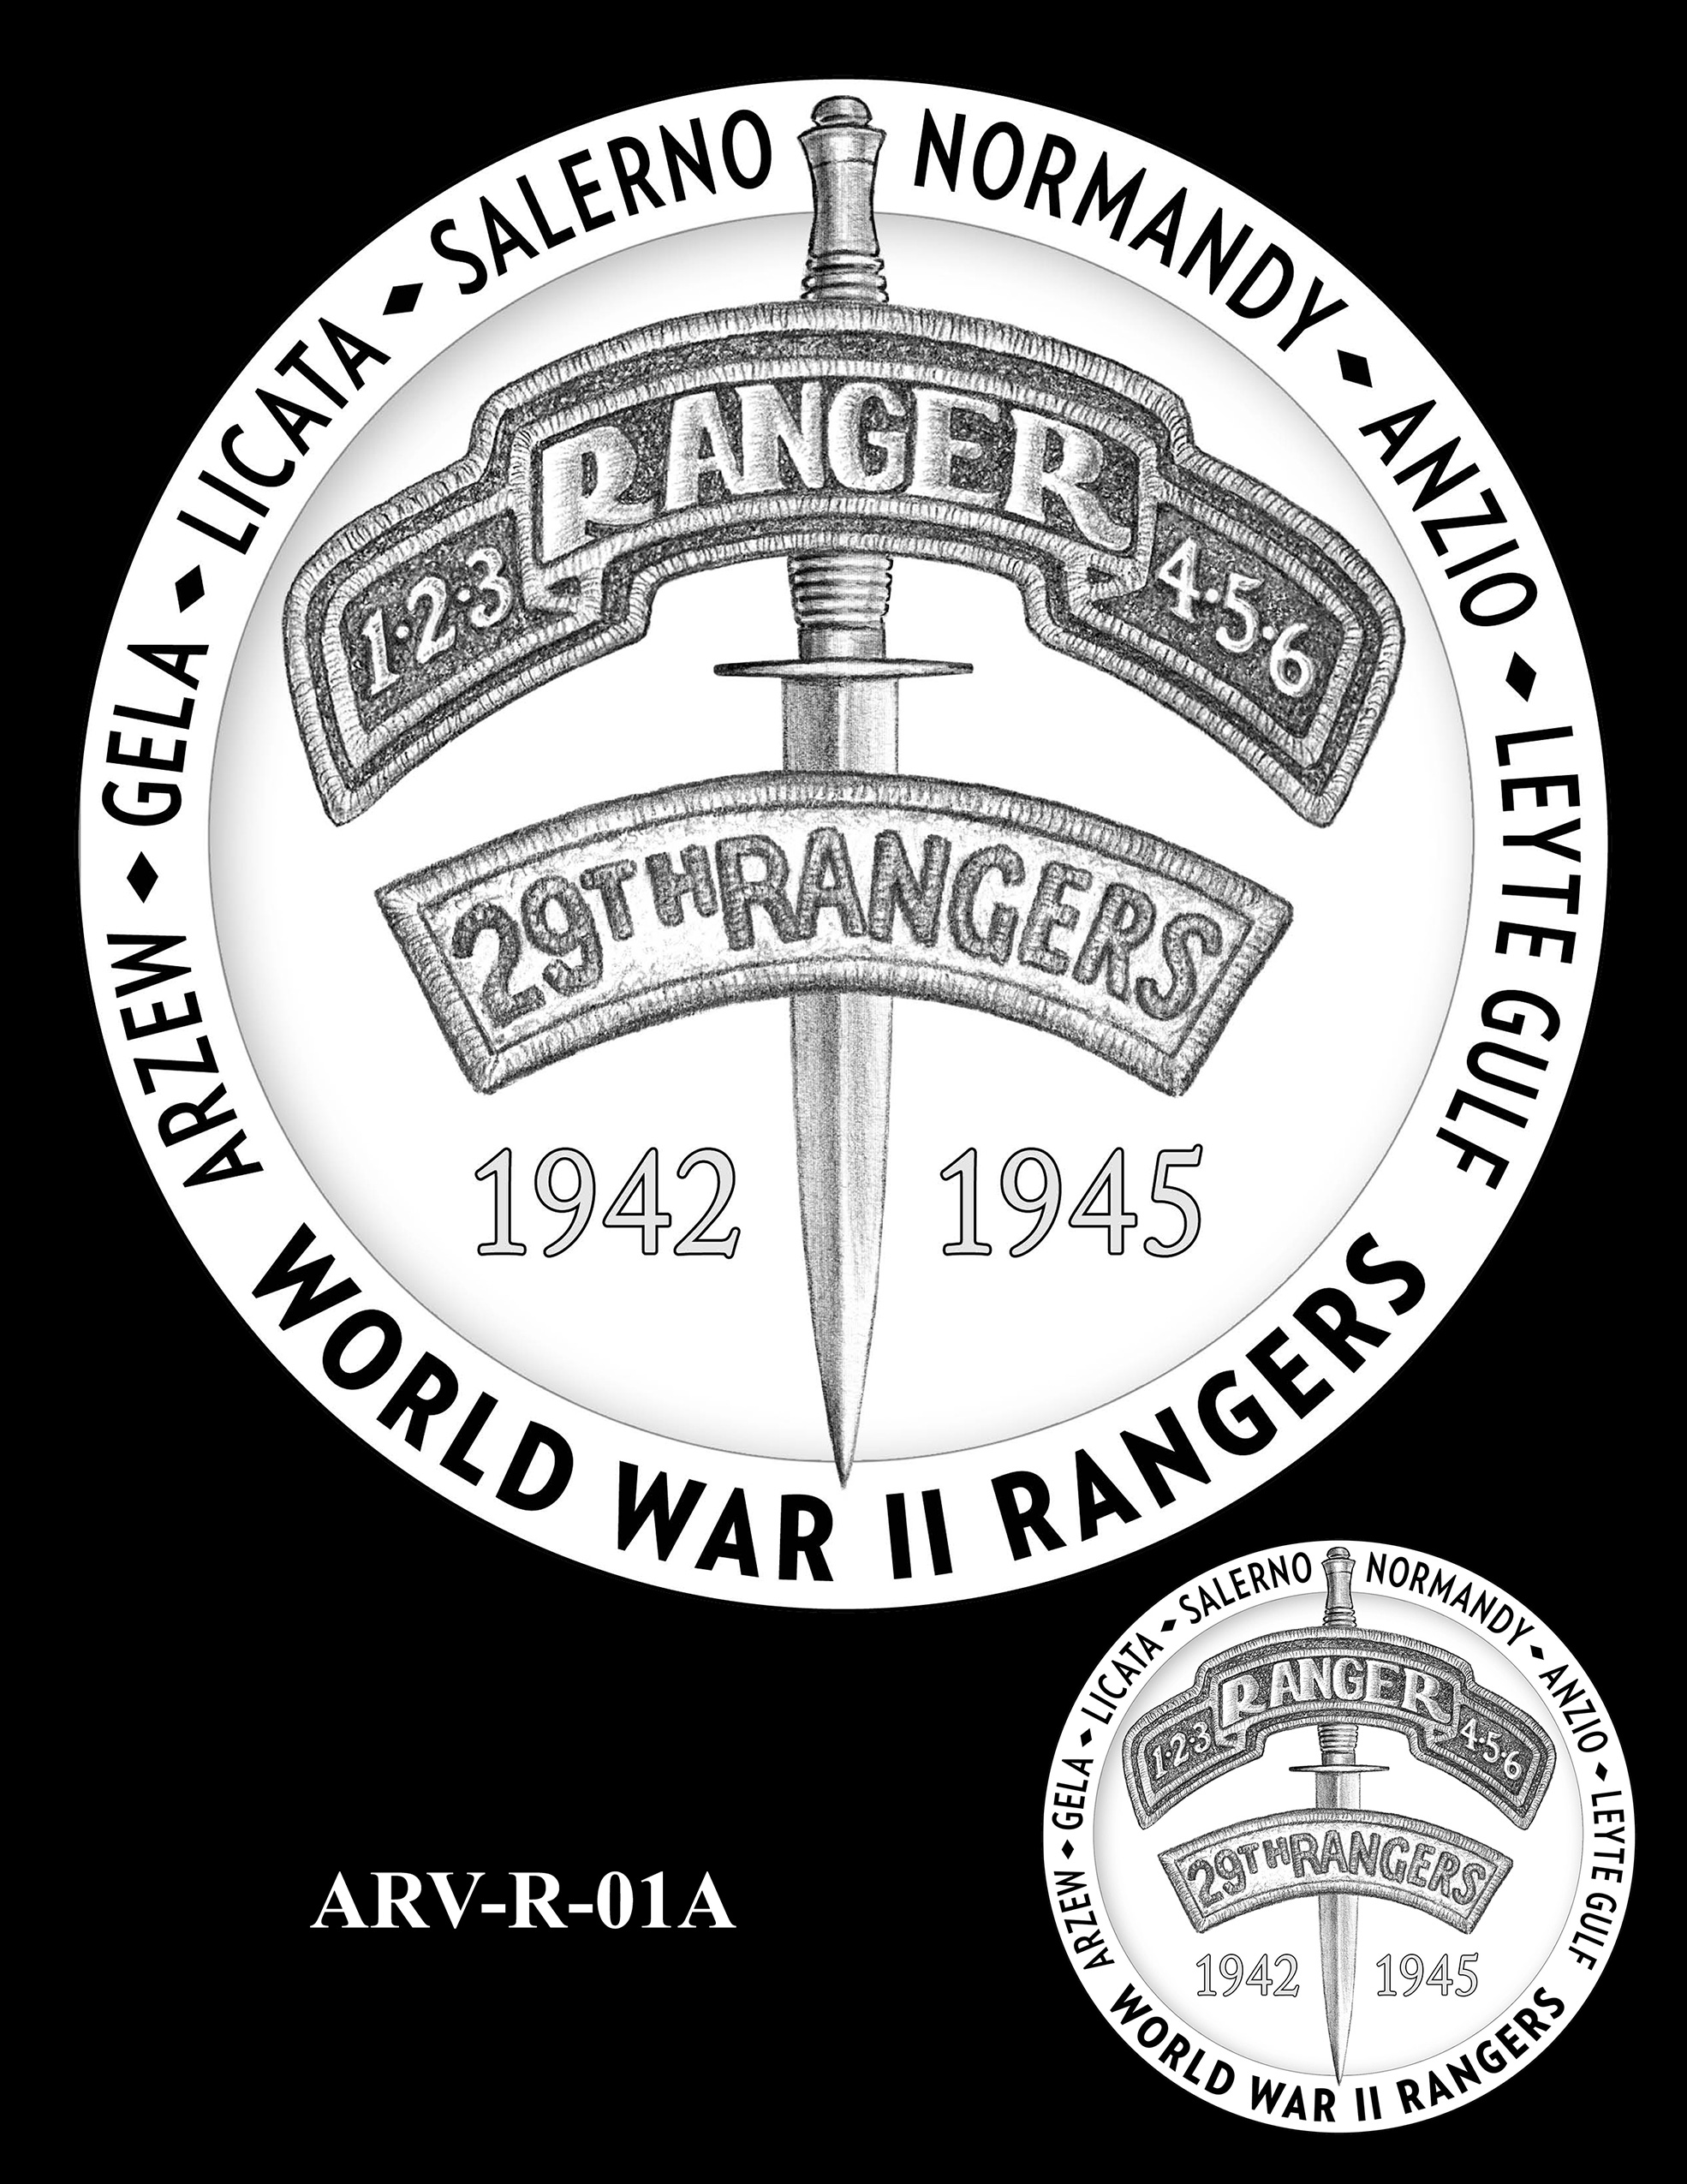 ARV-R-01A -- Army Ranger Veterans of WWII Congressional Gold Medal